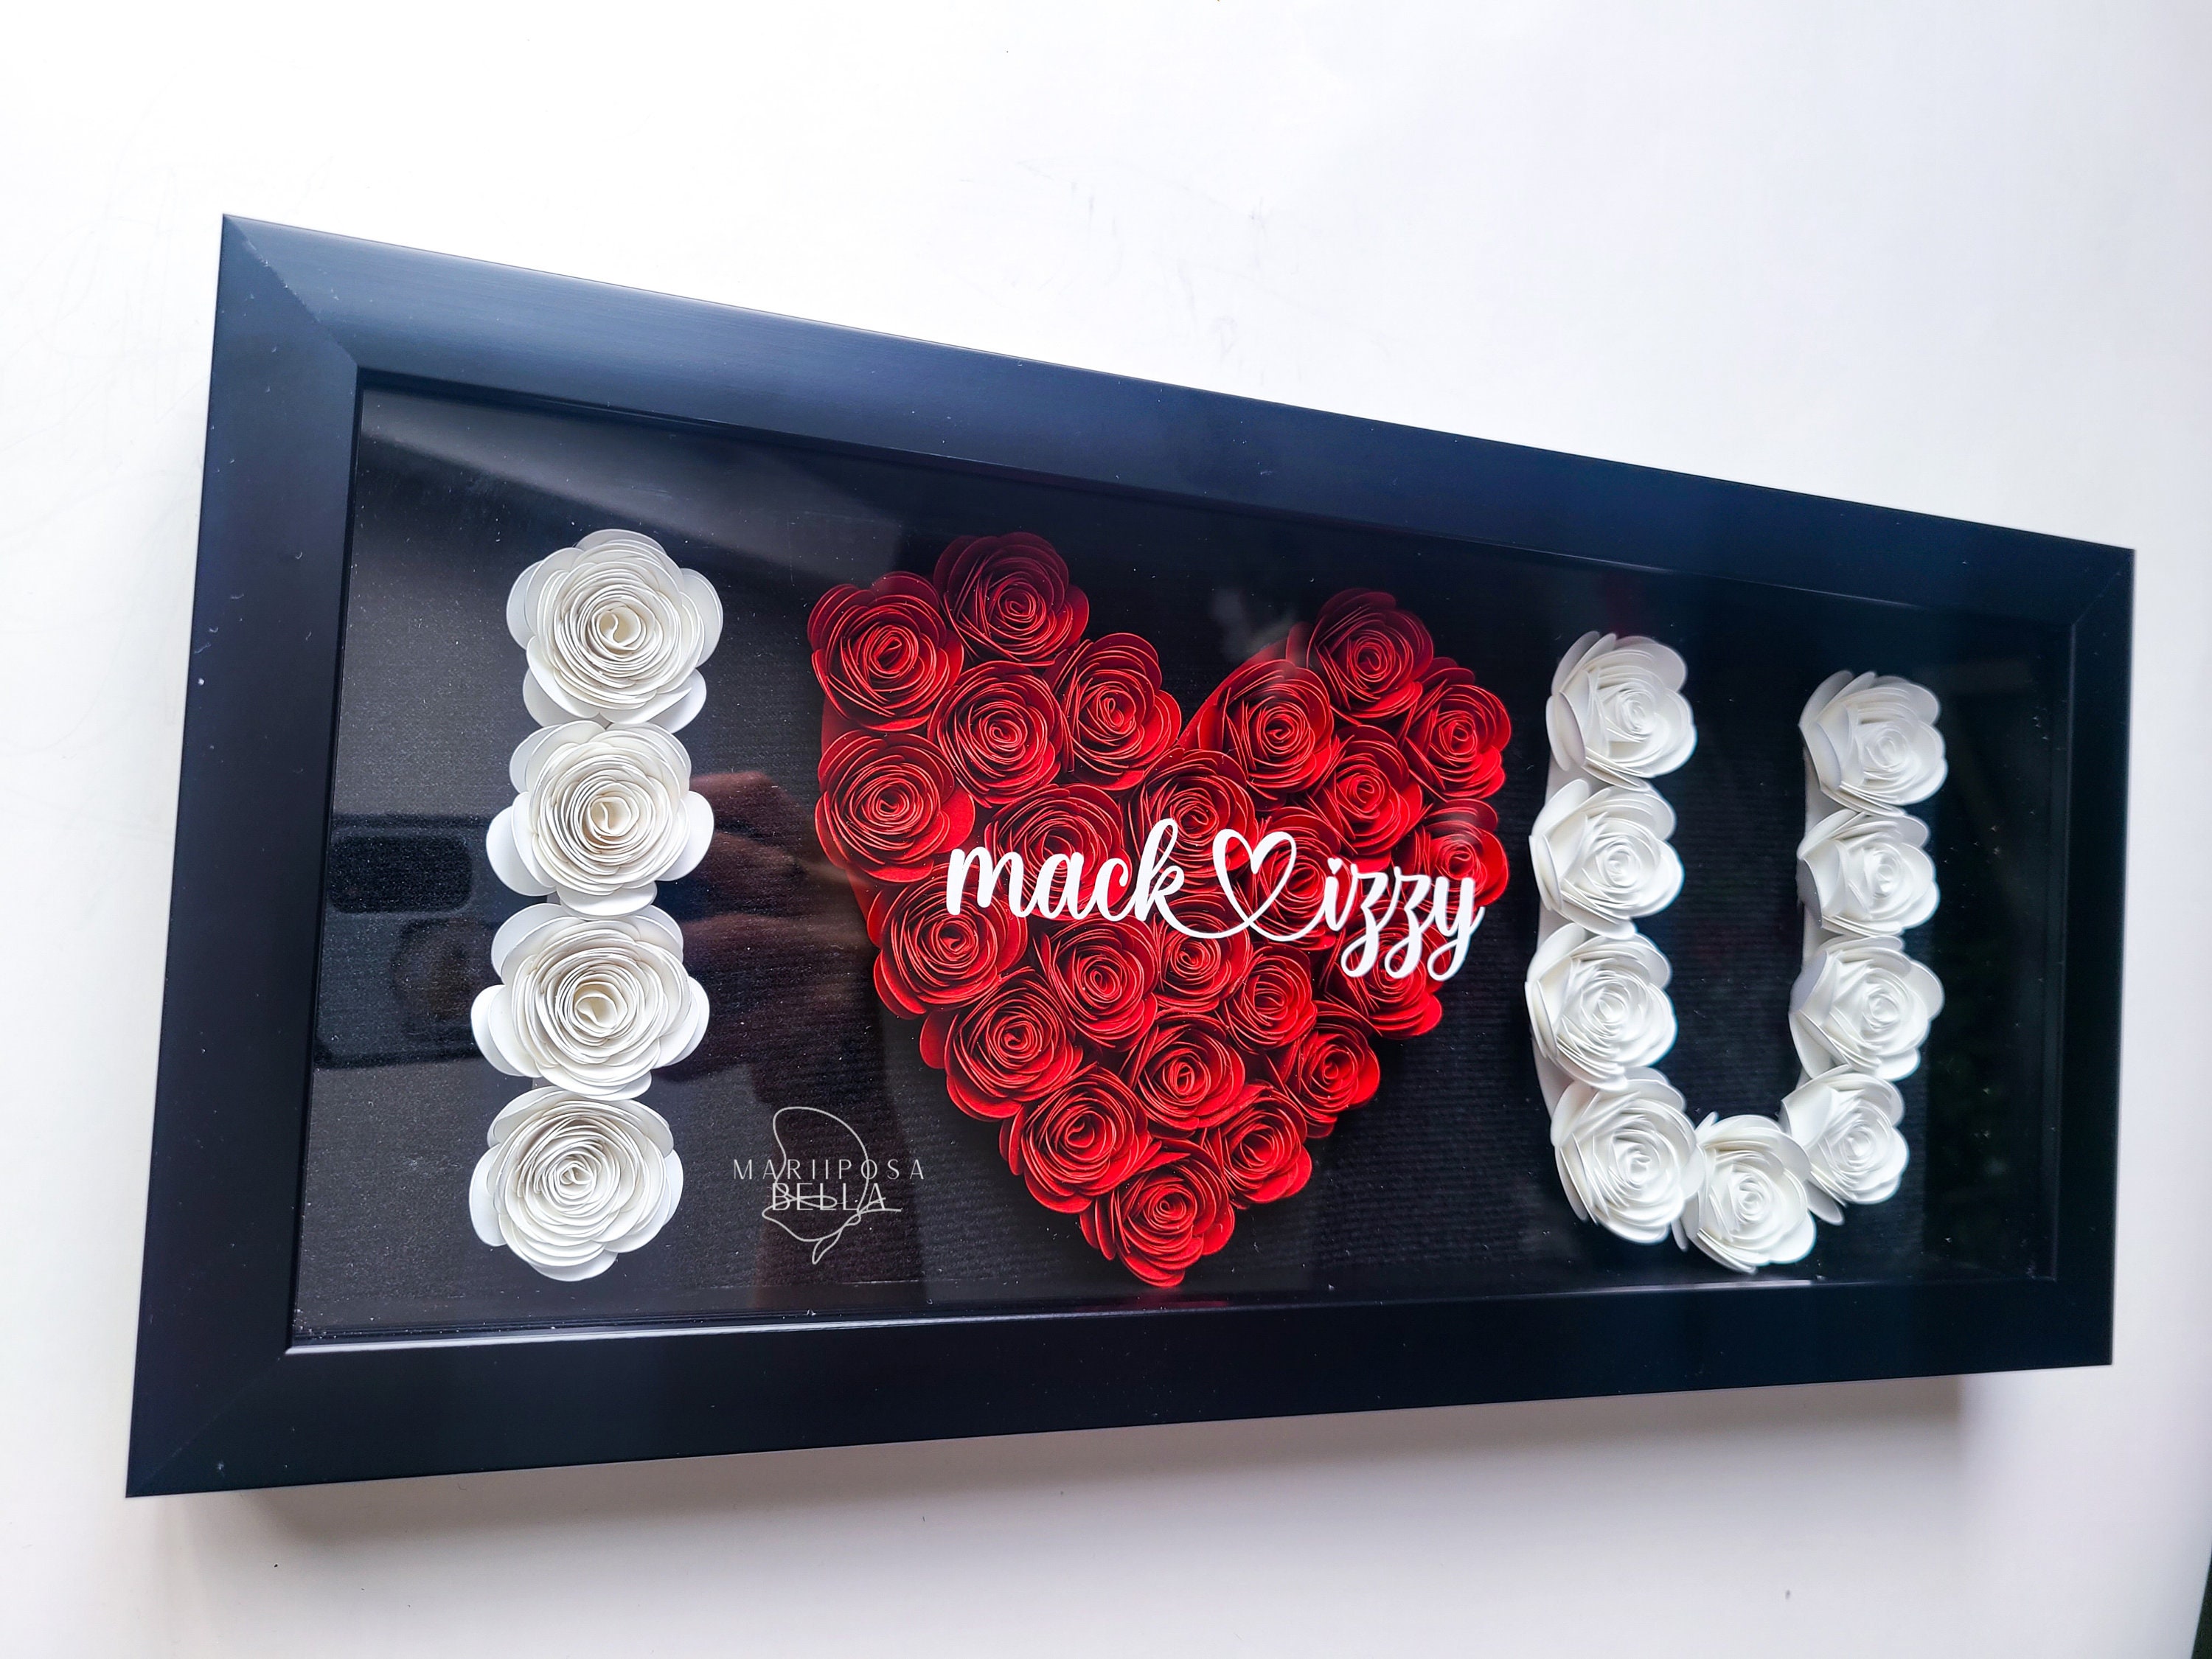 I Love You Flower Box Heart Shadowbox, Cute Gift for Girlfriend, Gift for  Her, Valentine's Day Gift Idea, 4life, I Love You for Life 